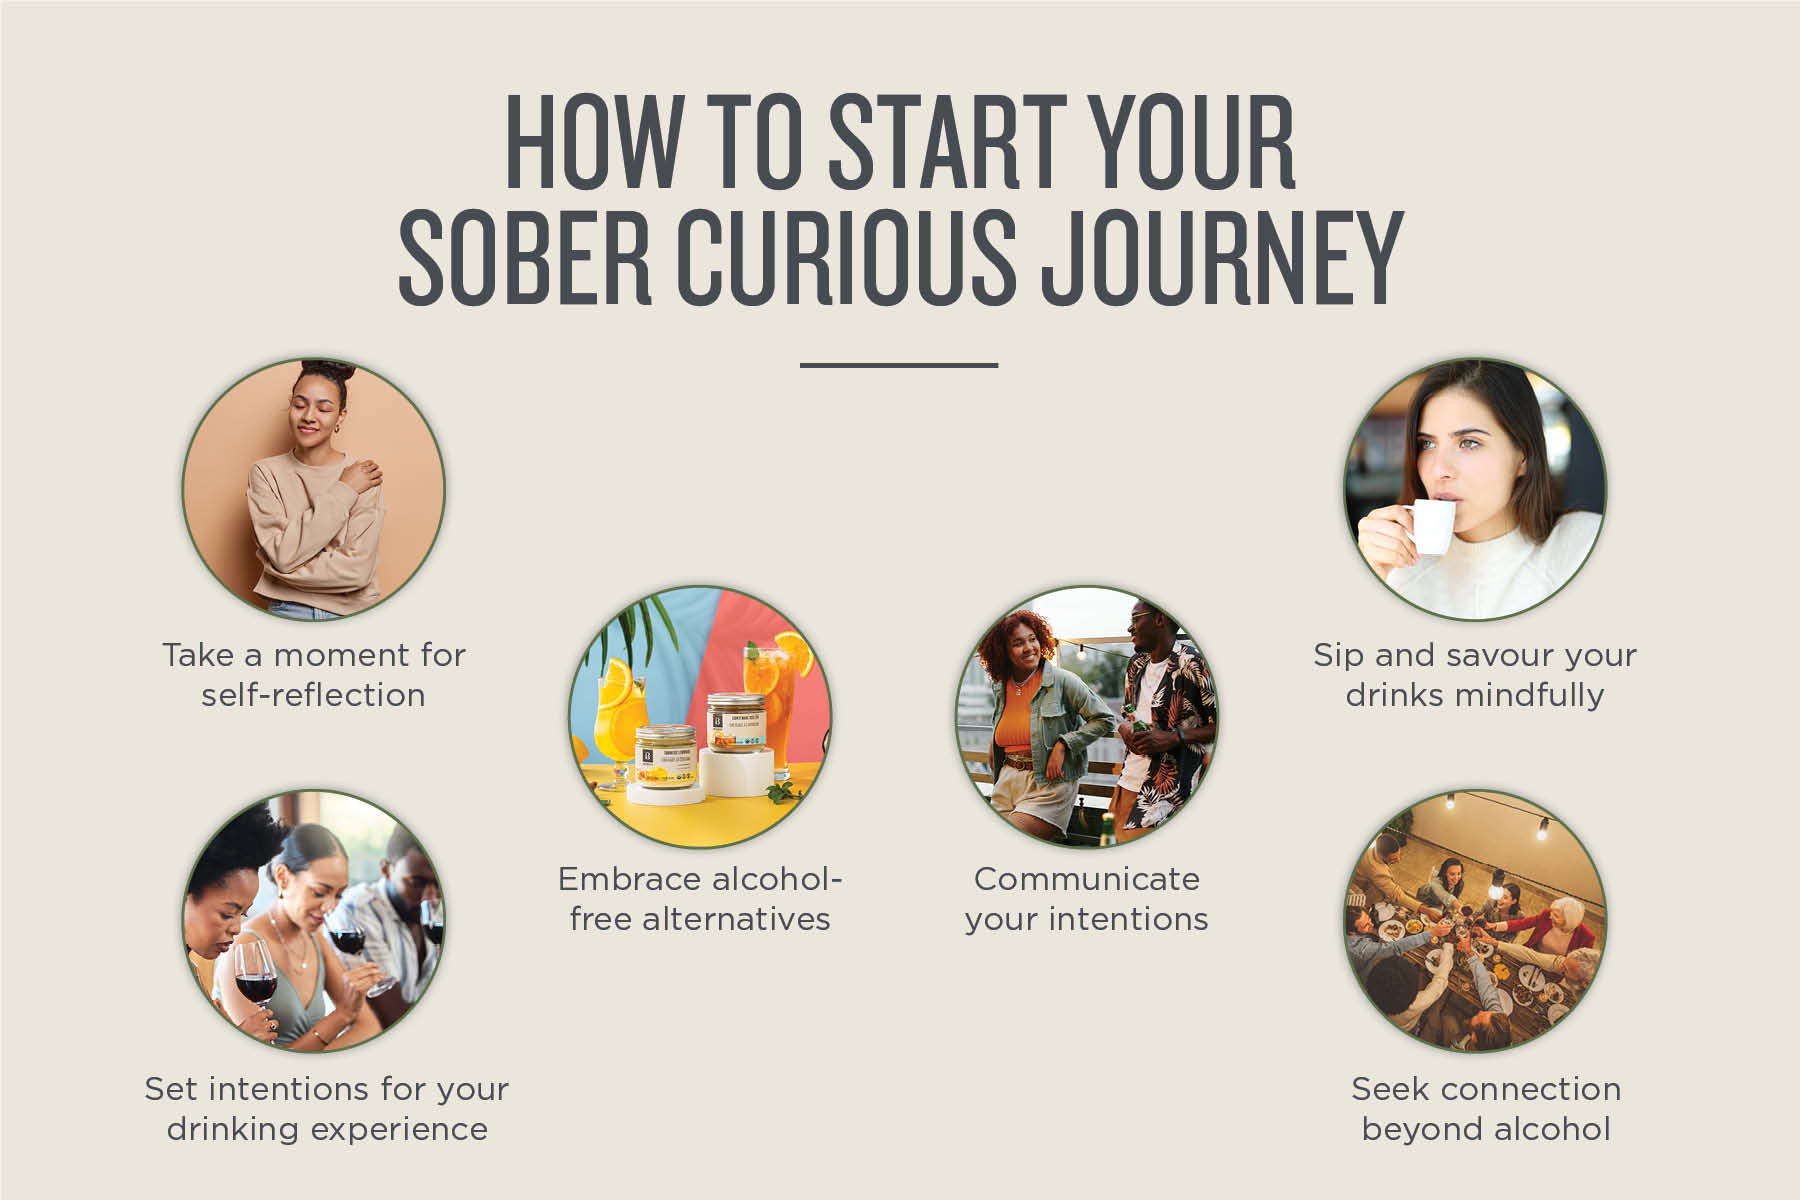 Starting your sober curious journey